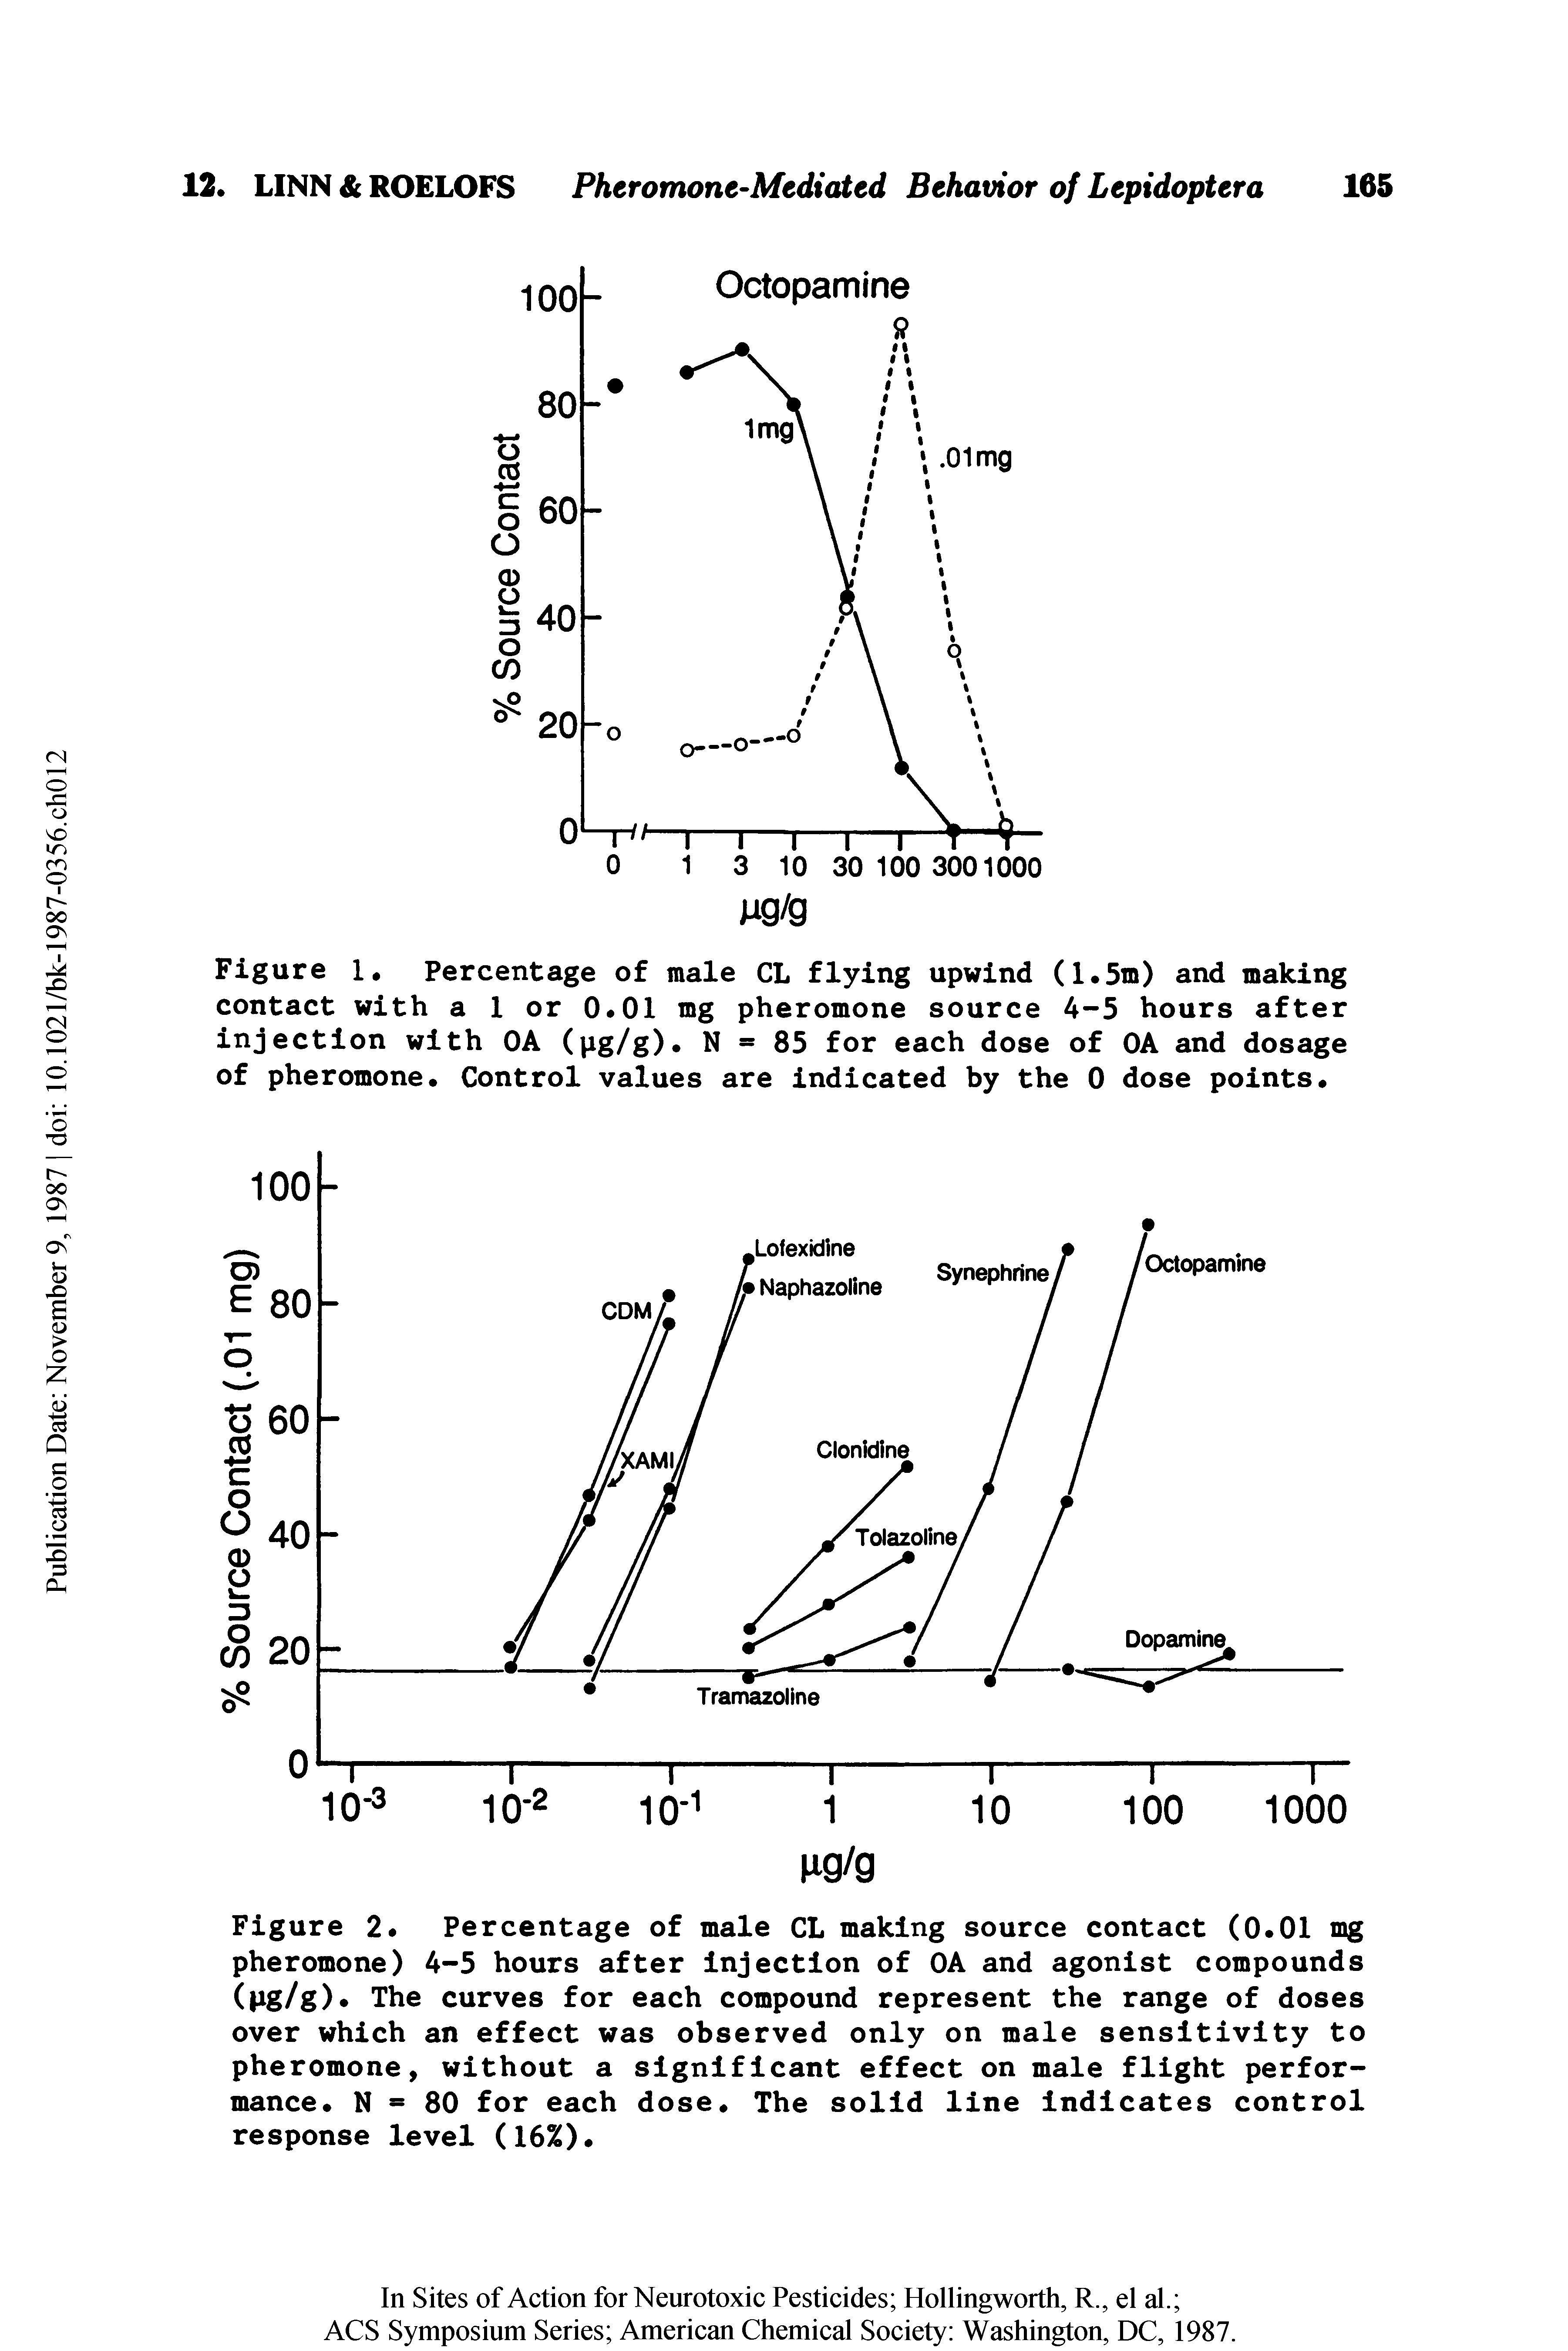 Figure 1, Percentage of male CL flying upwind (1.5m) and making contact with a 1 or 0.01 mg pheromone source 4-5 hours after injection with OA (pg/g). N 85 for each dose of OA and dosage of pheromone. Control values are indicated by the 0 dose points.